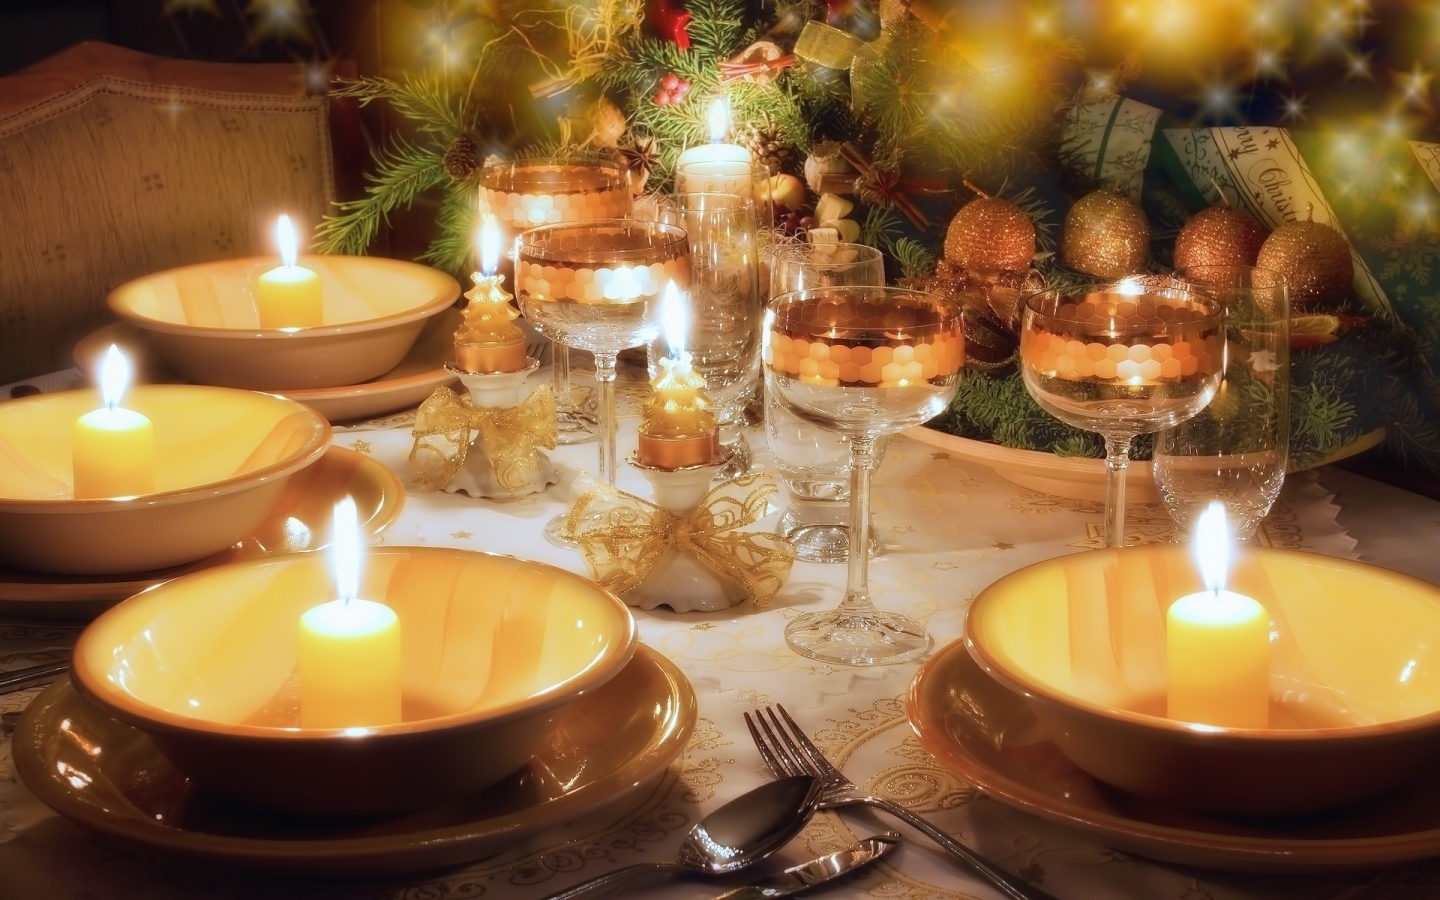 Candles in the dishes on the holiday table